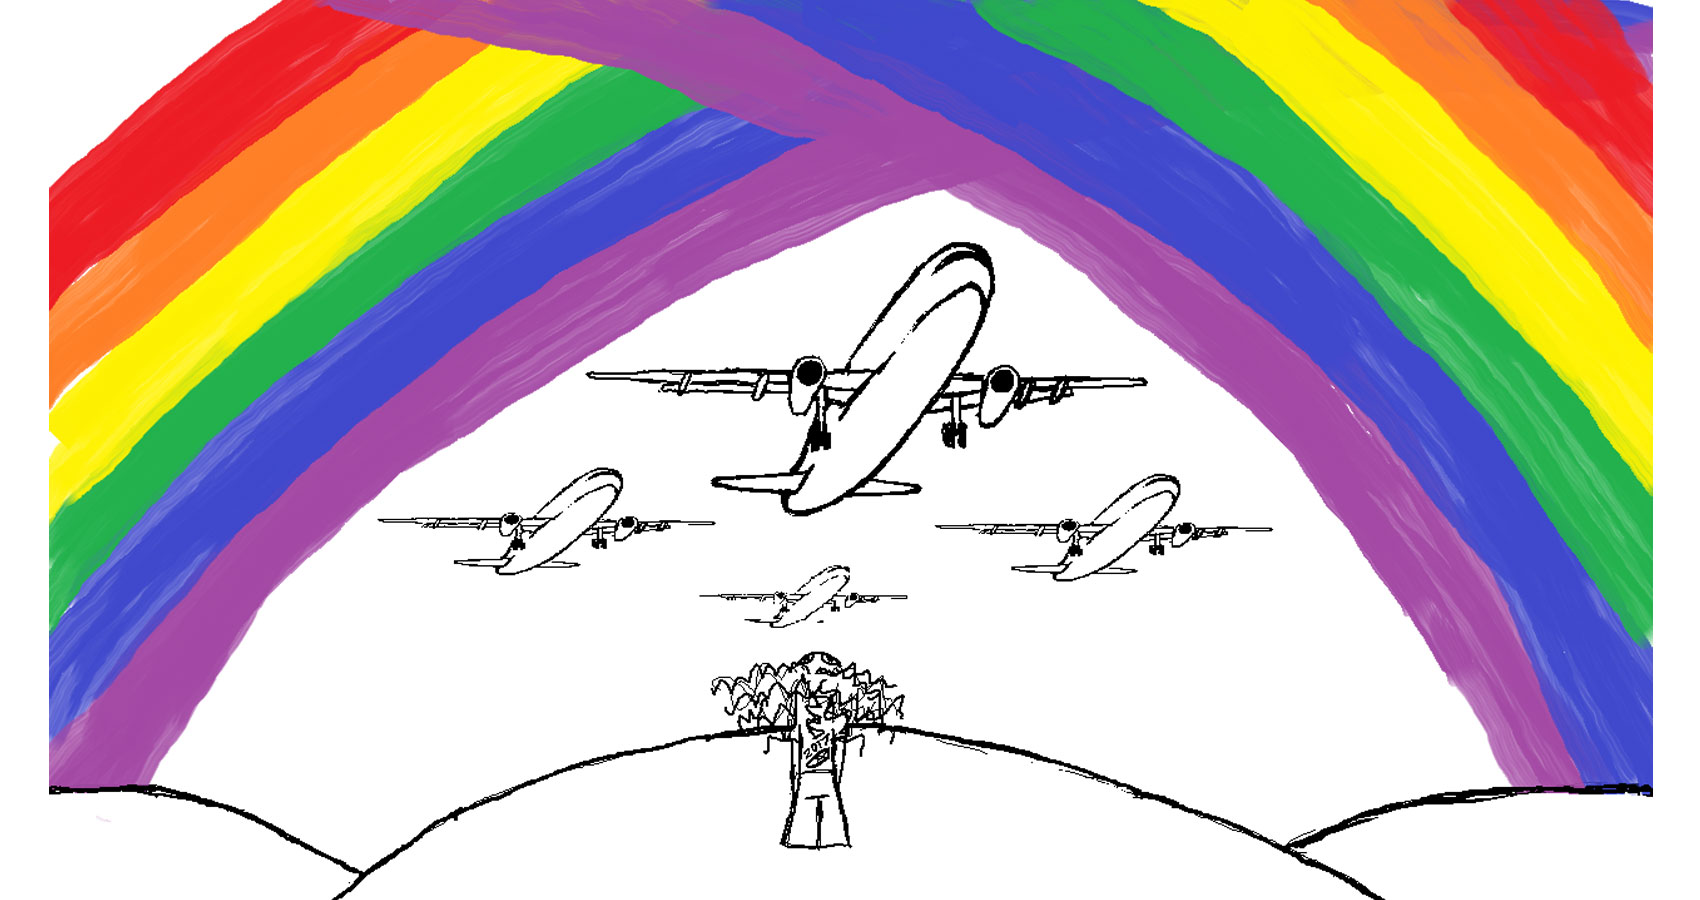 Airplanes And Double Rainbows by Robyn MacKinnon at Spillwords.com